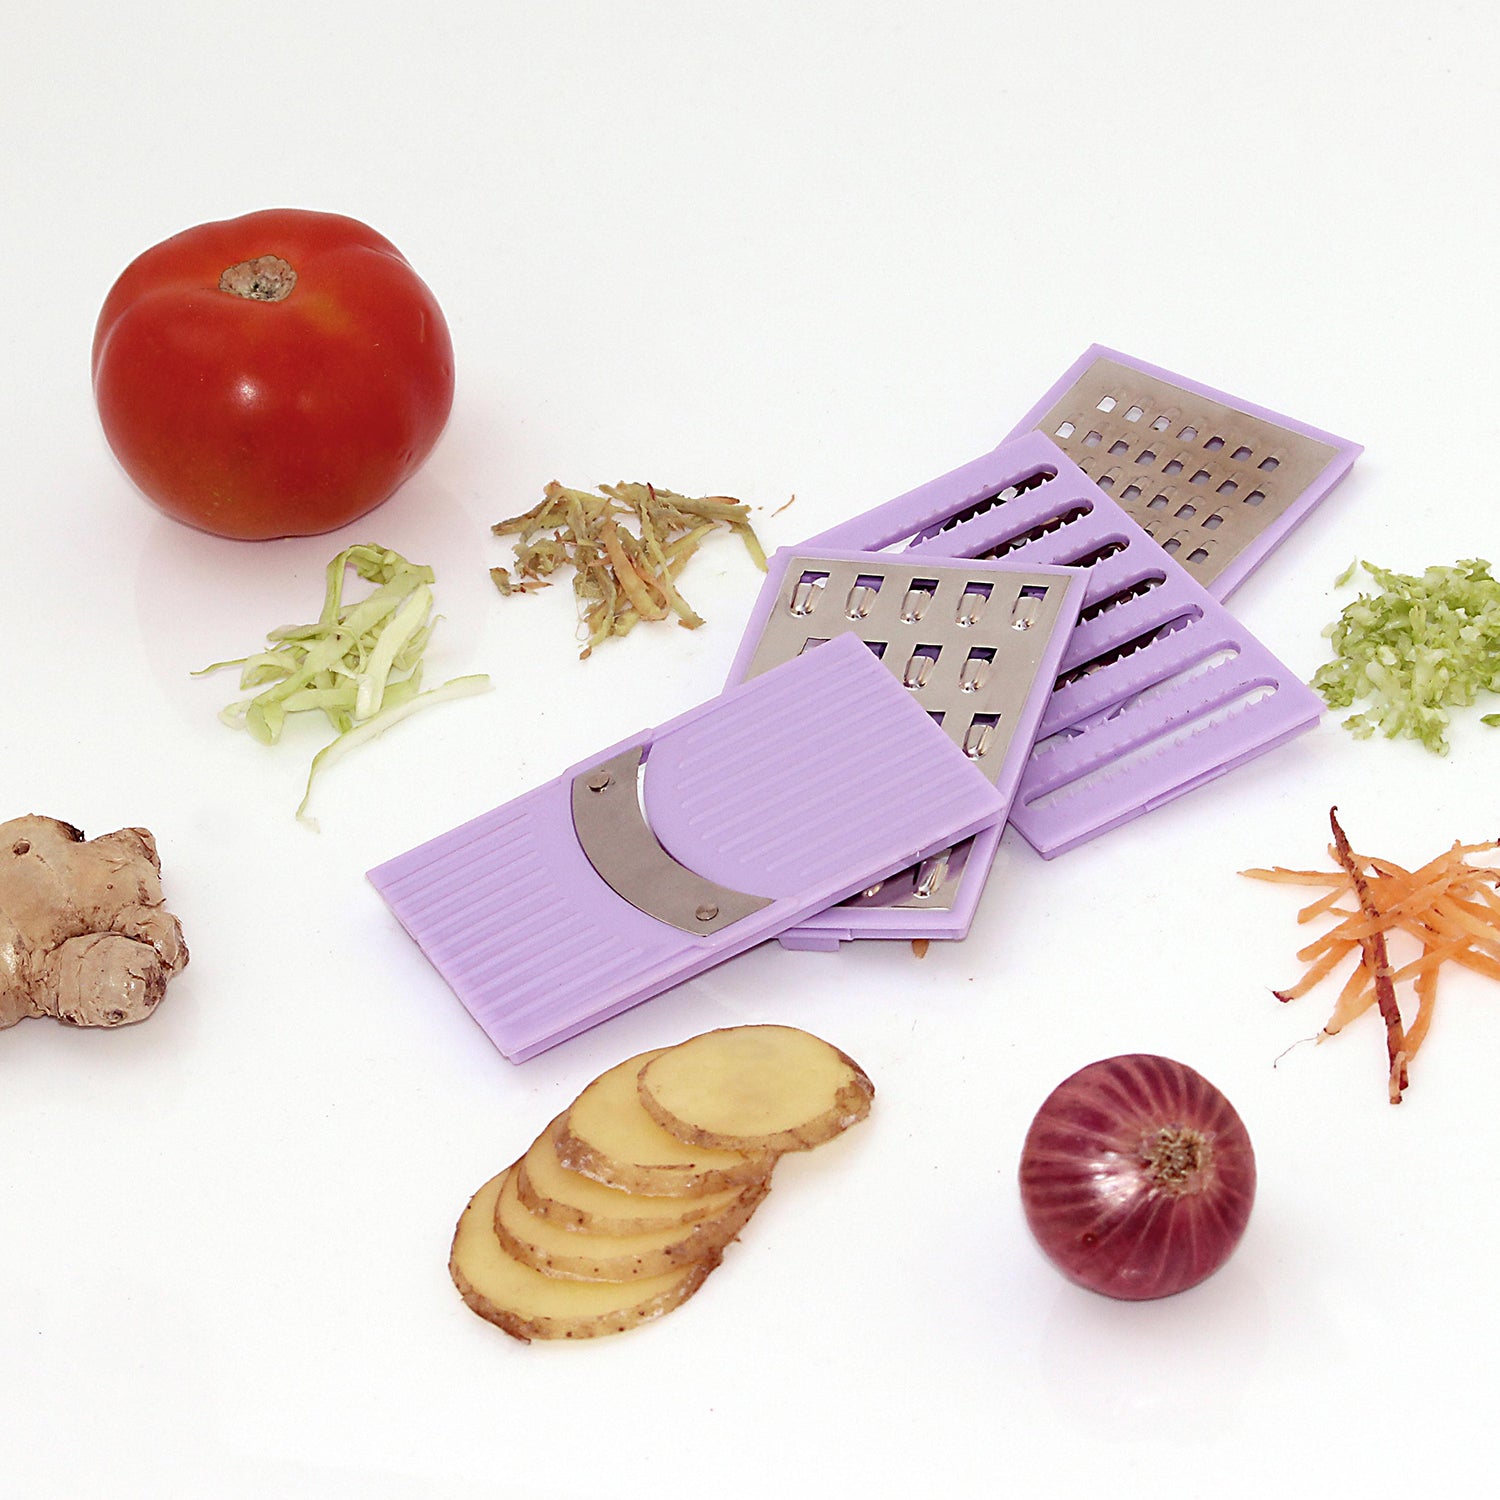 2650 4 In 1 Plastic Vegetable And Fruit Grater And Slicer For Kitchen DeoDap